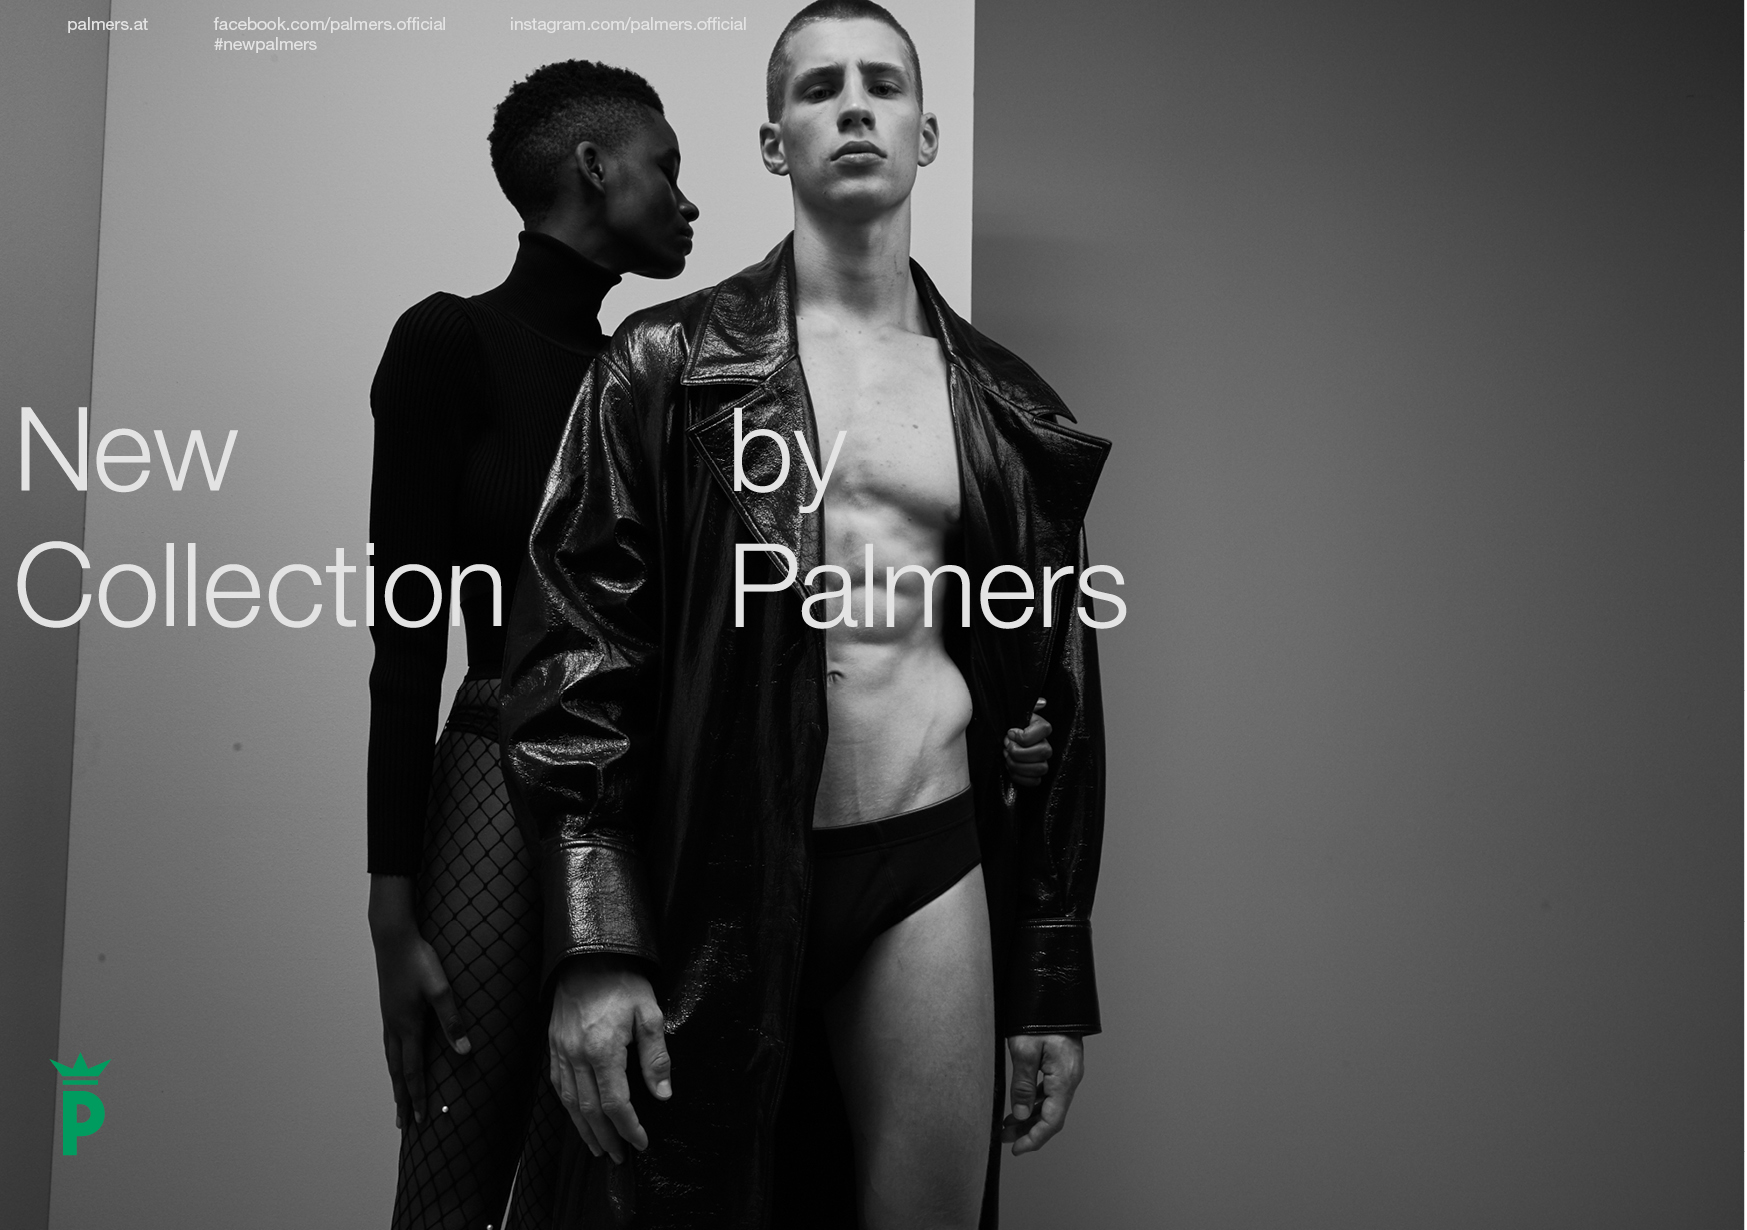 The New (Basic) Collection <br />
by Palmers <br />
